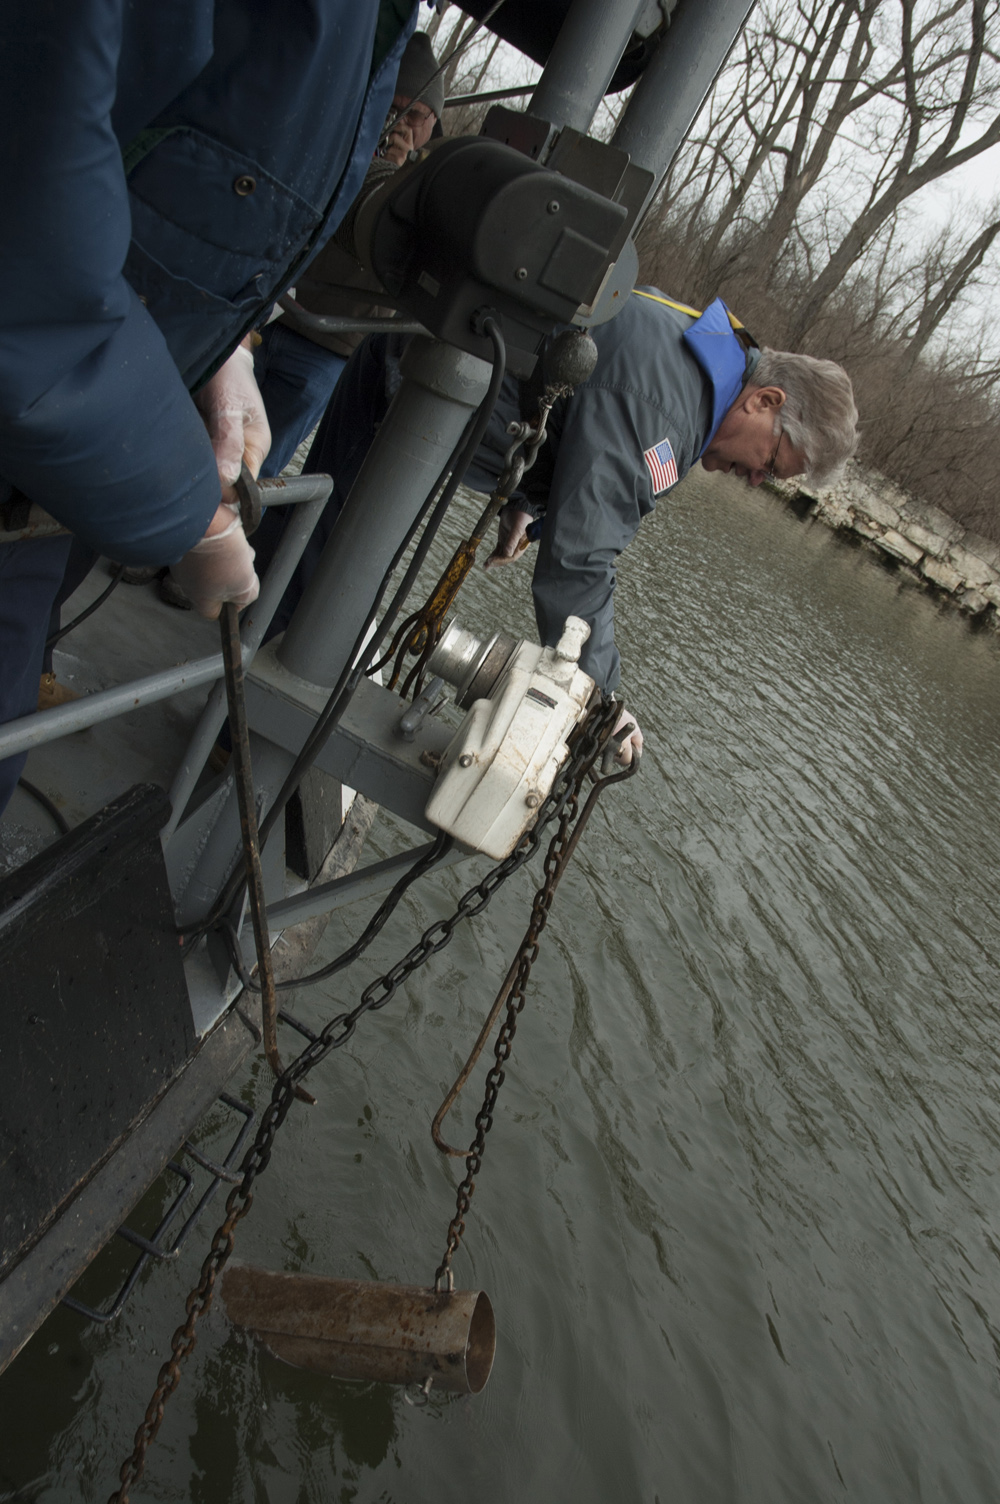 A MWRD pollution control technician collecting a dissolved oxygen sample from the patrol boat. (Credit: Metropolitan Water Reclamation District of Greater Chicago)